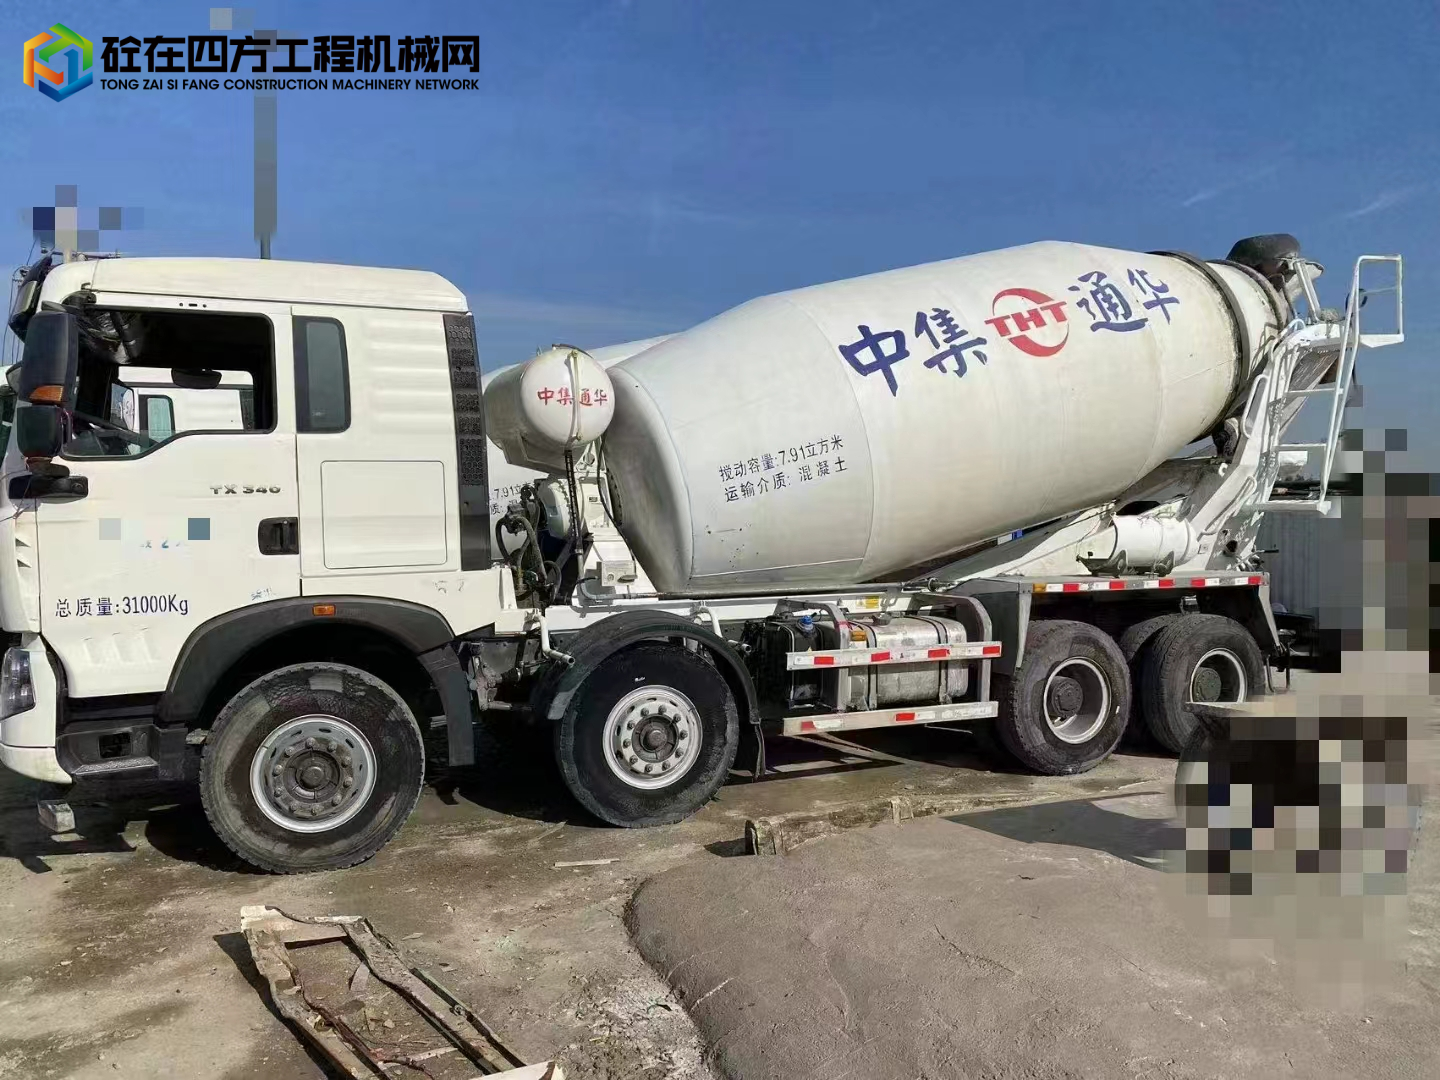 https://images.tongzsf.com/tong/truck_machine/20240228/165ded6f240967.jpg